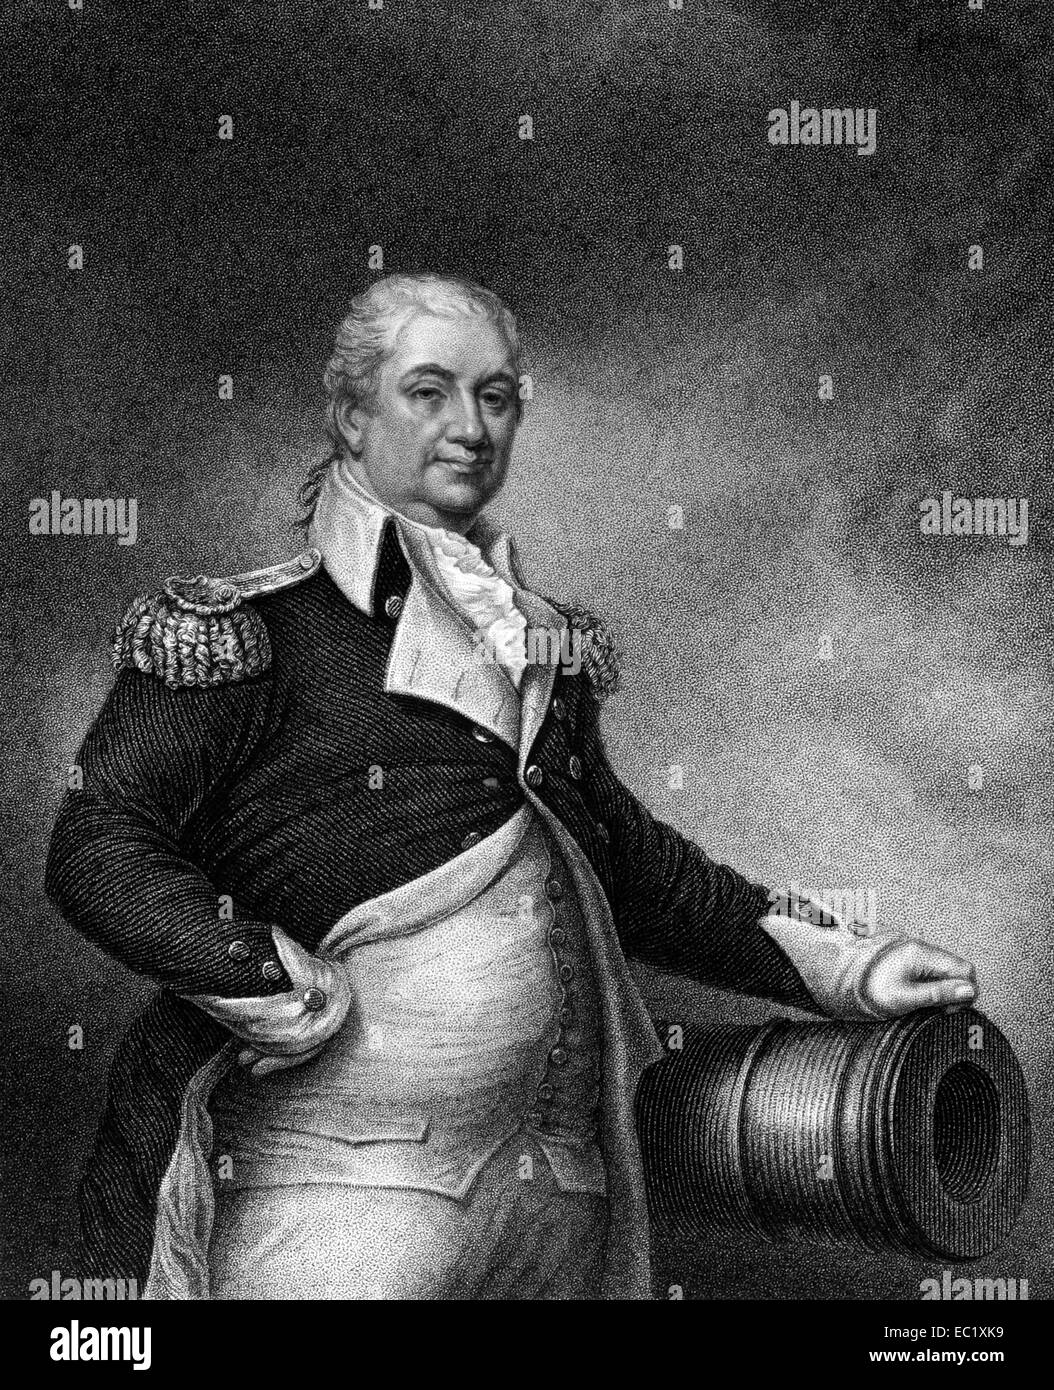 Henry Knox (1750-1806) on engraving from 1835. Military officer of the Continental Army and later the United States Army. Stock Photo